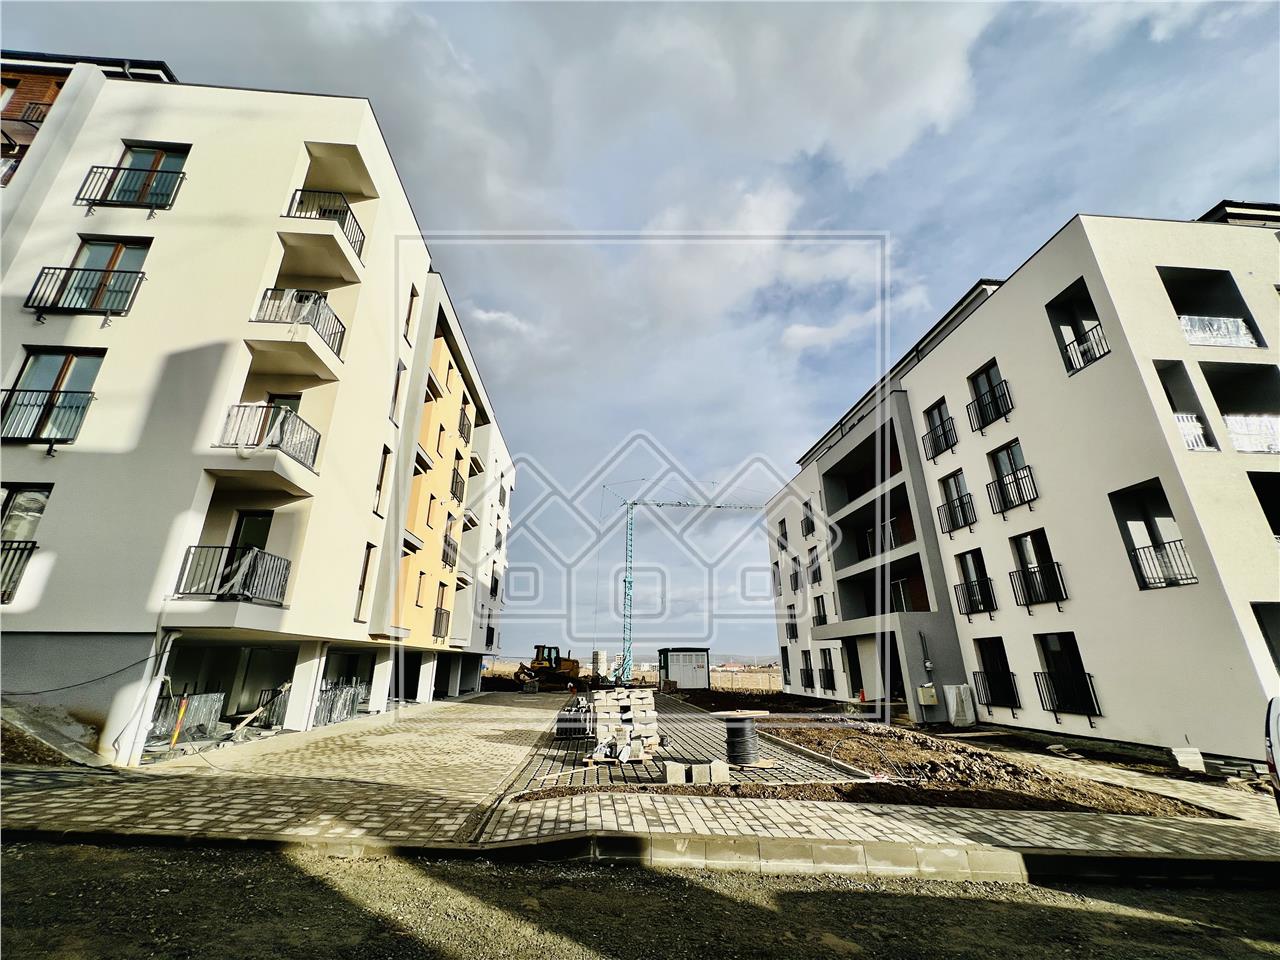 Neppendorf Residence Residential Complex - Sibiu Real Estate